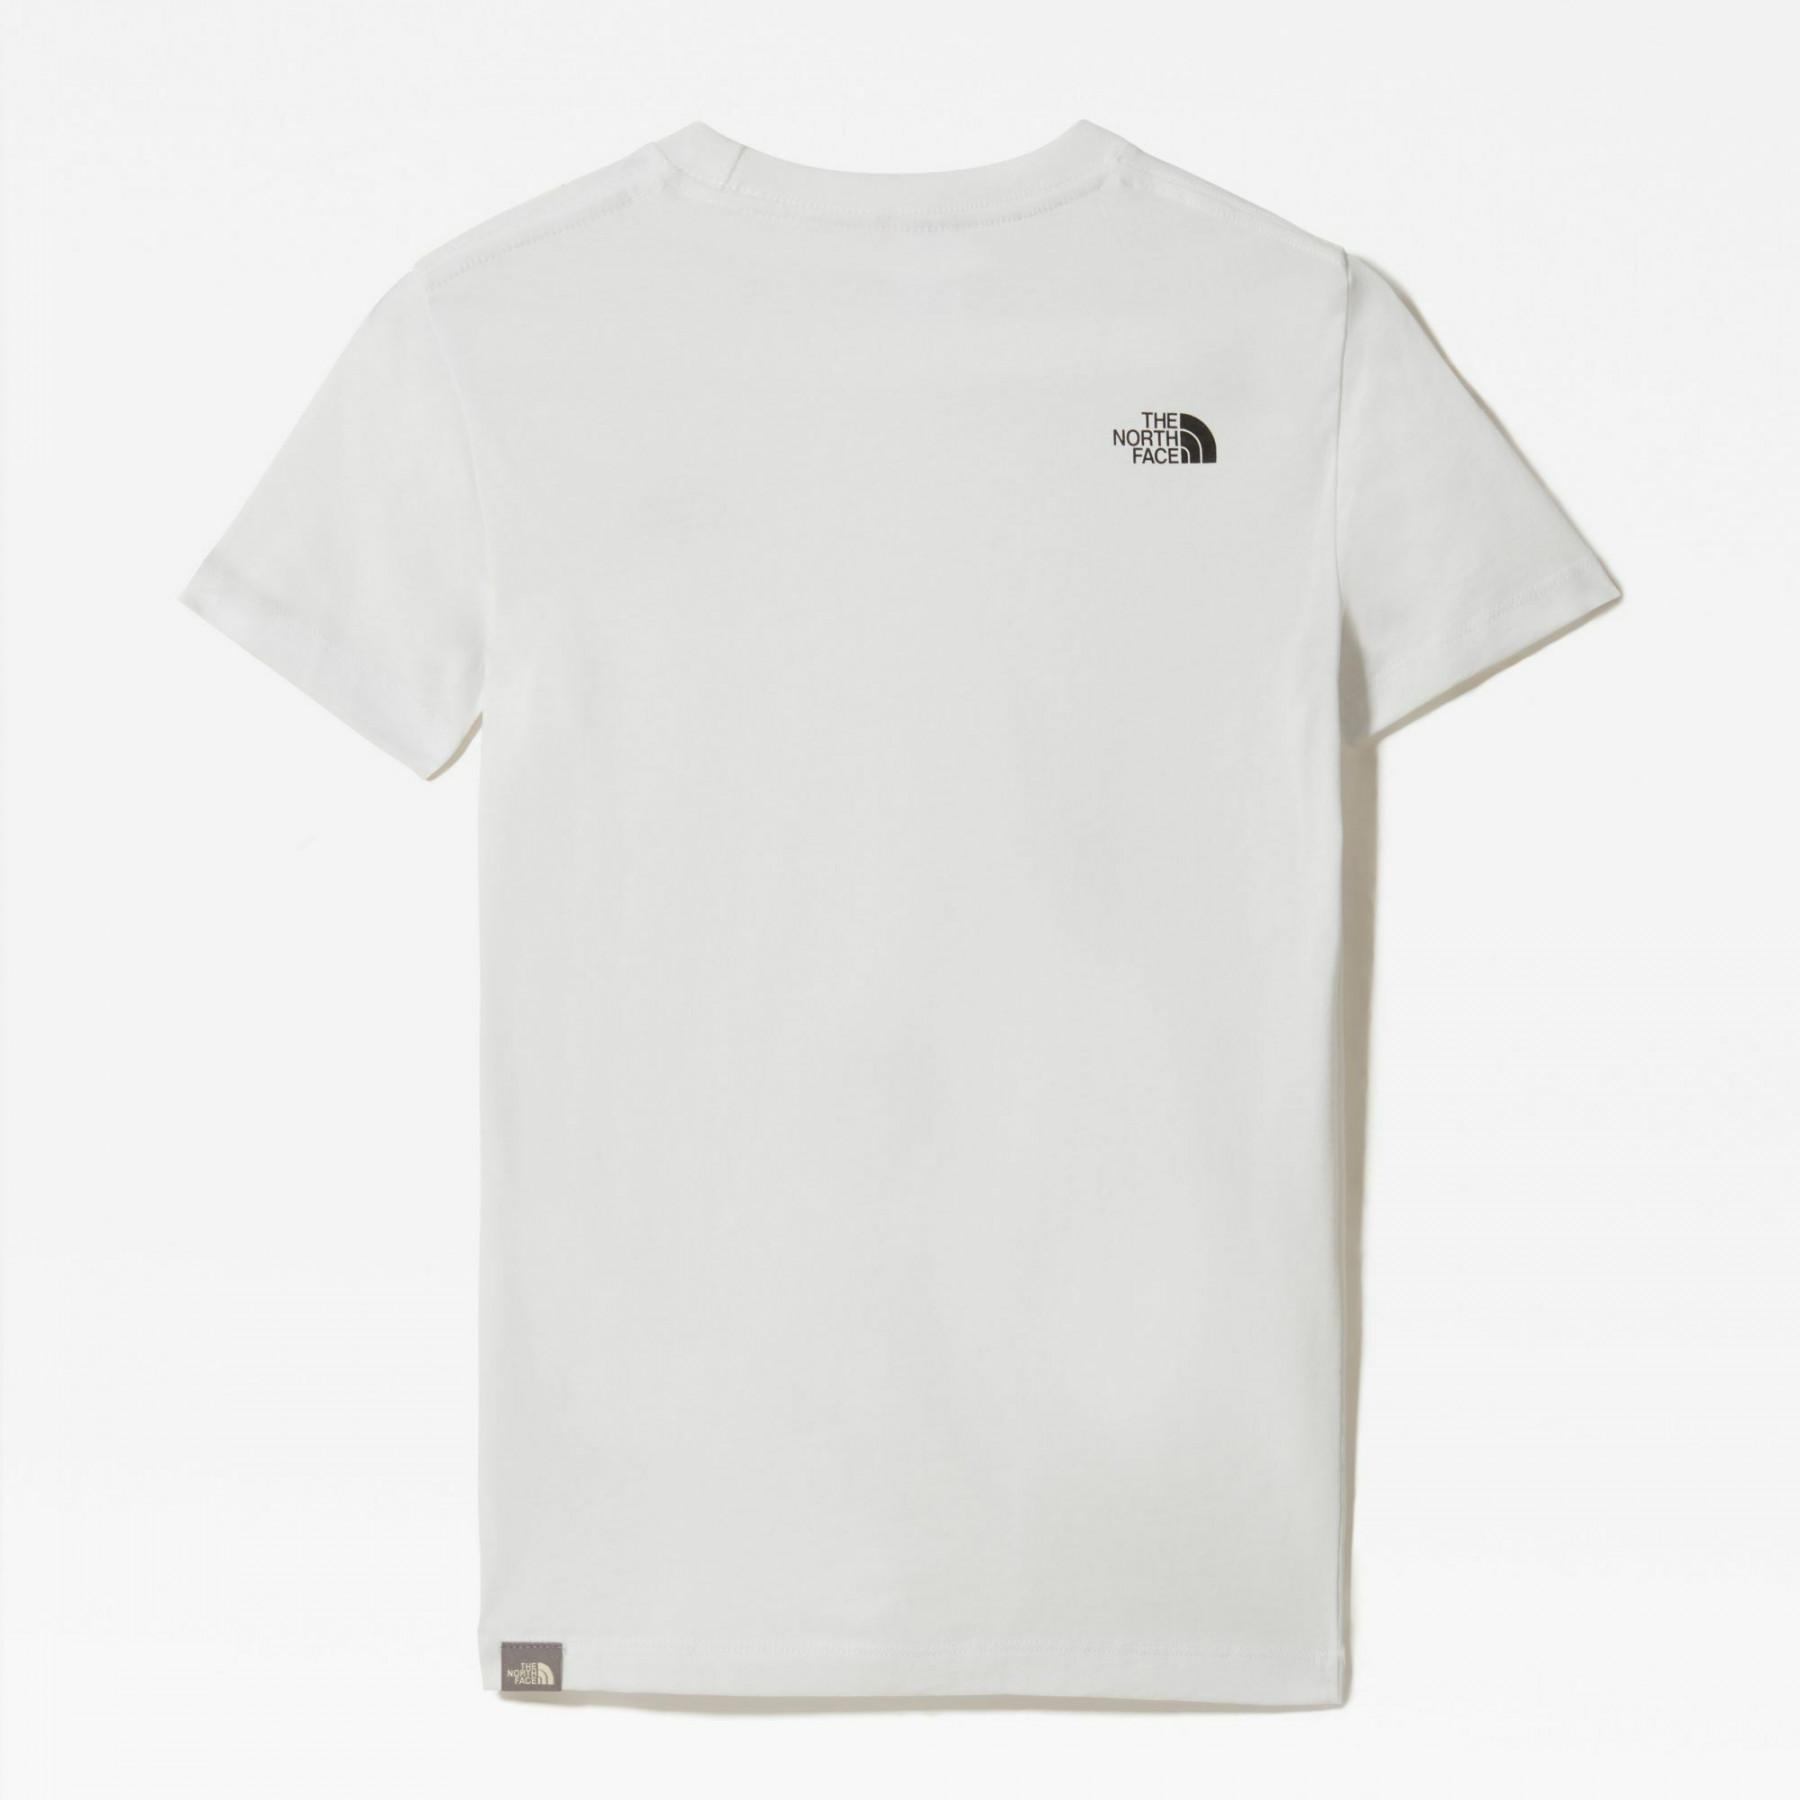 T-shirt per bambini The North Face Simple Dome